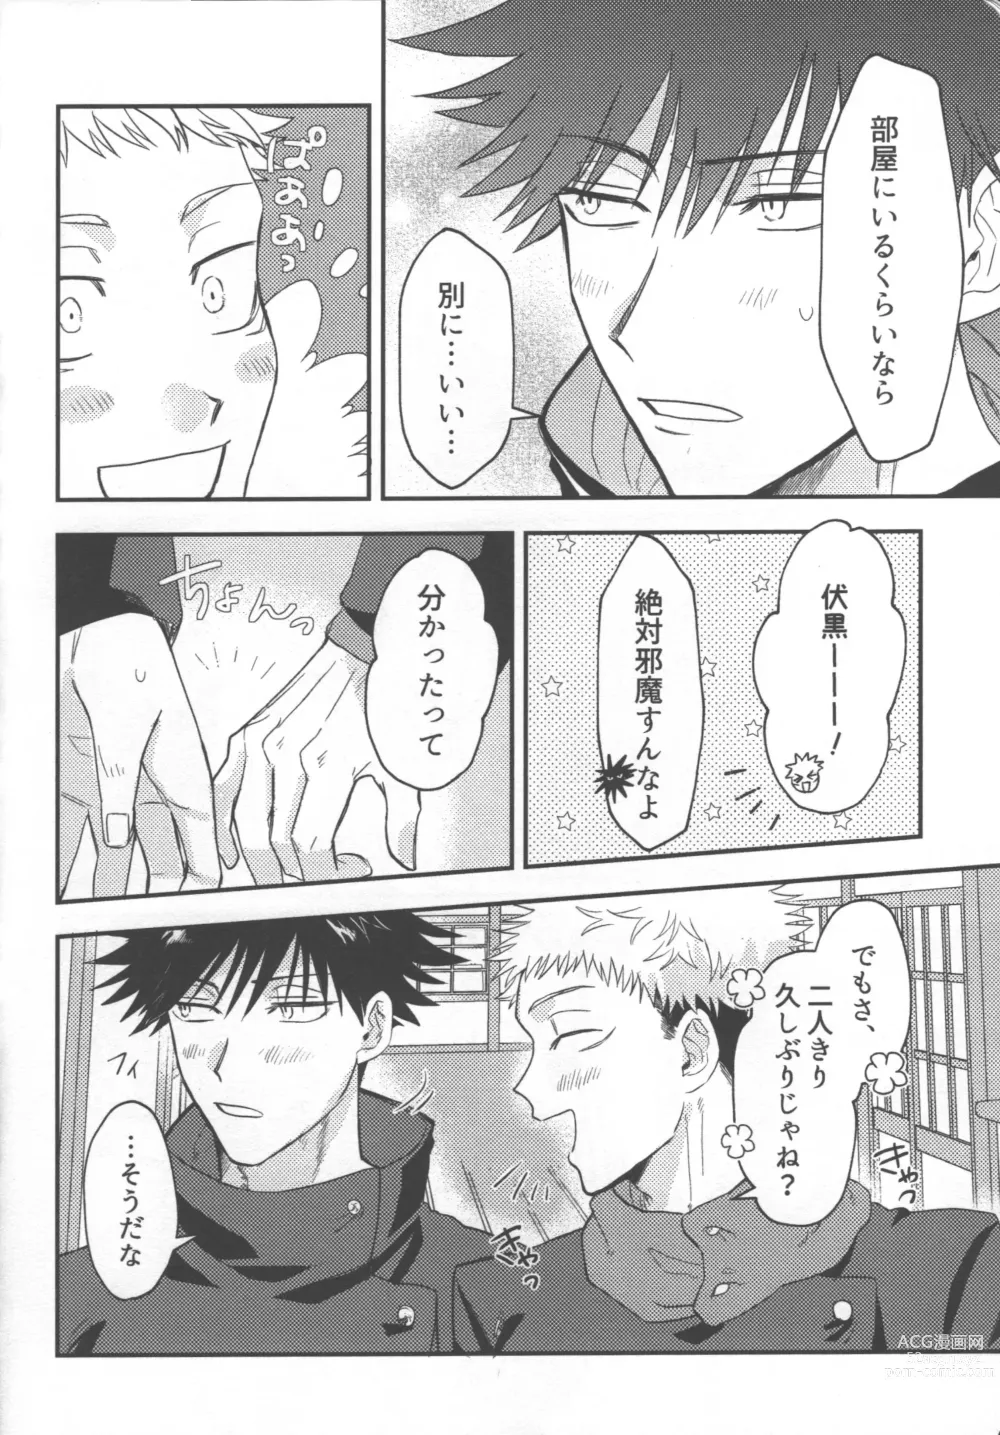 Page 7 of doujinshi Dont Look at ME Like That.